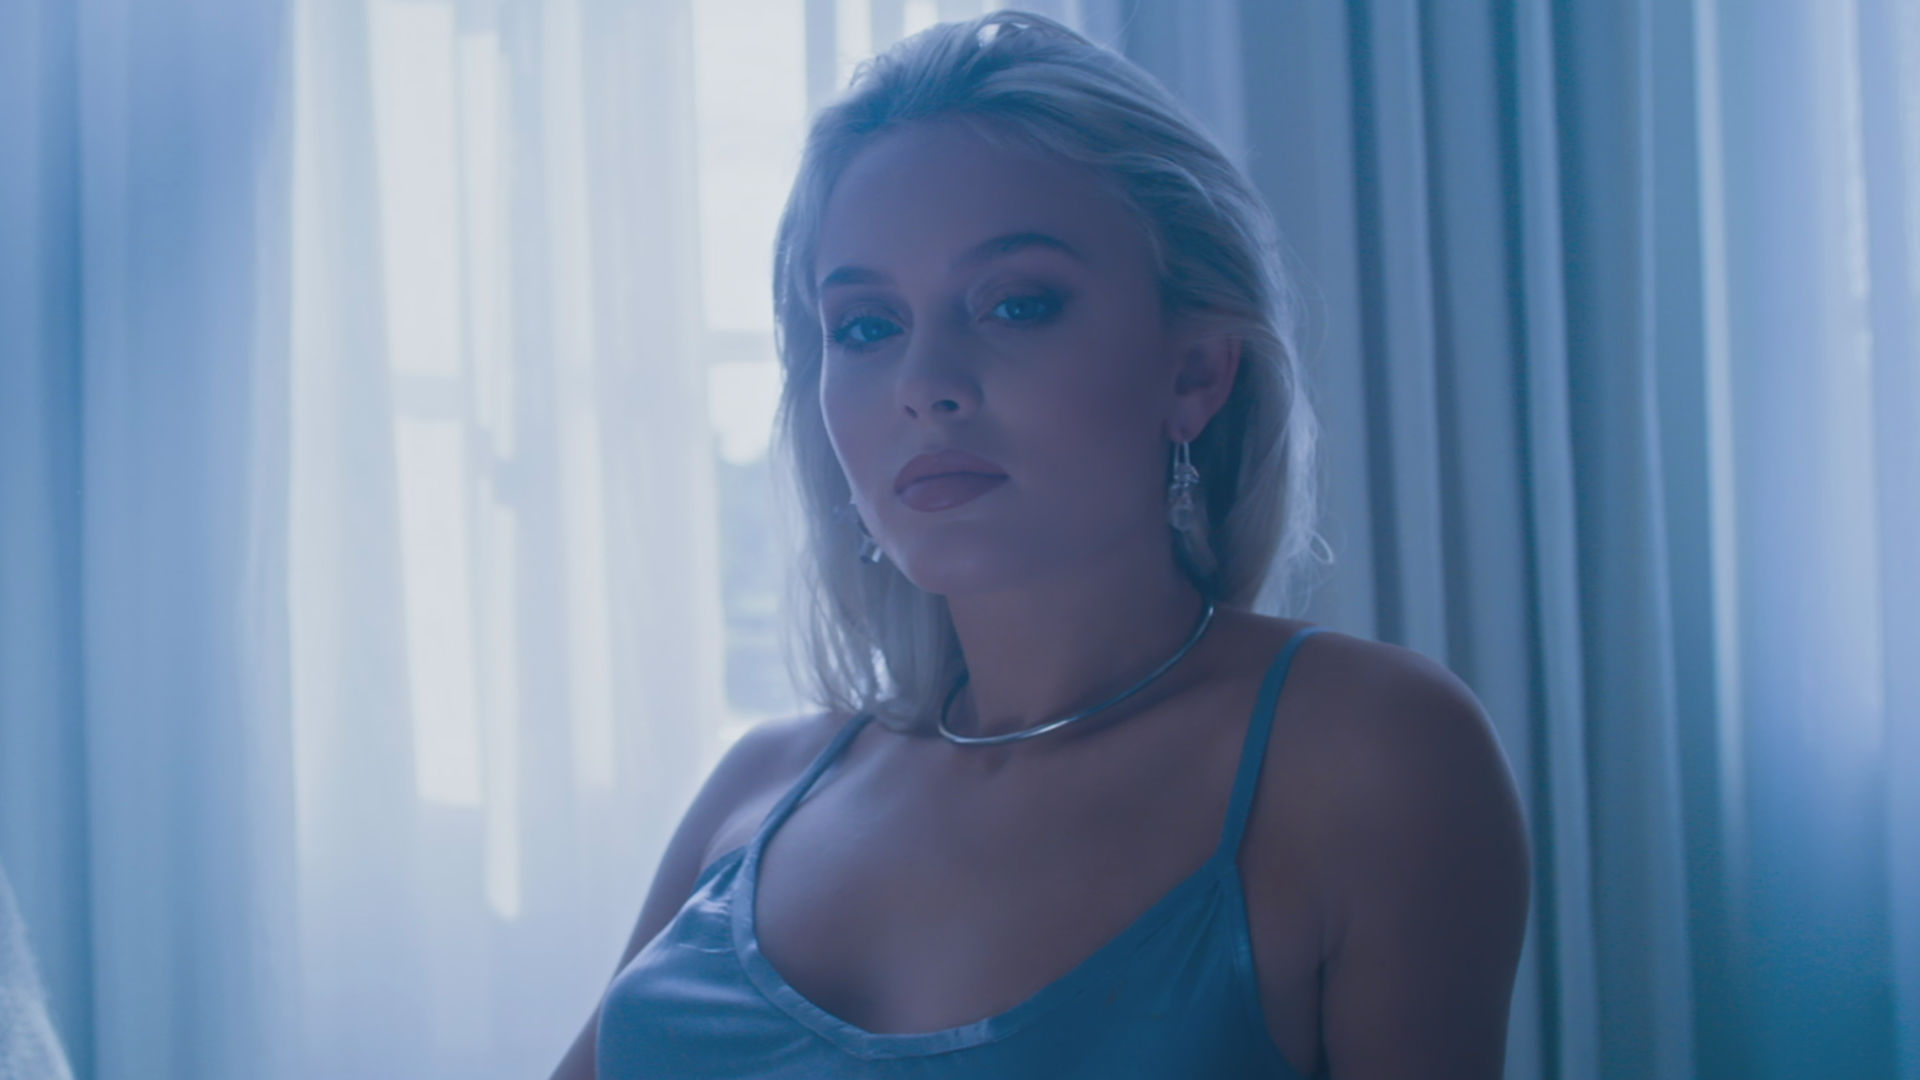 Ain't My Fault By Zara Larsson On Apple Music - Zara Larsson Aint My Fault Official Video , HD Wallpaper & Backgrounds